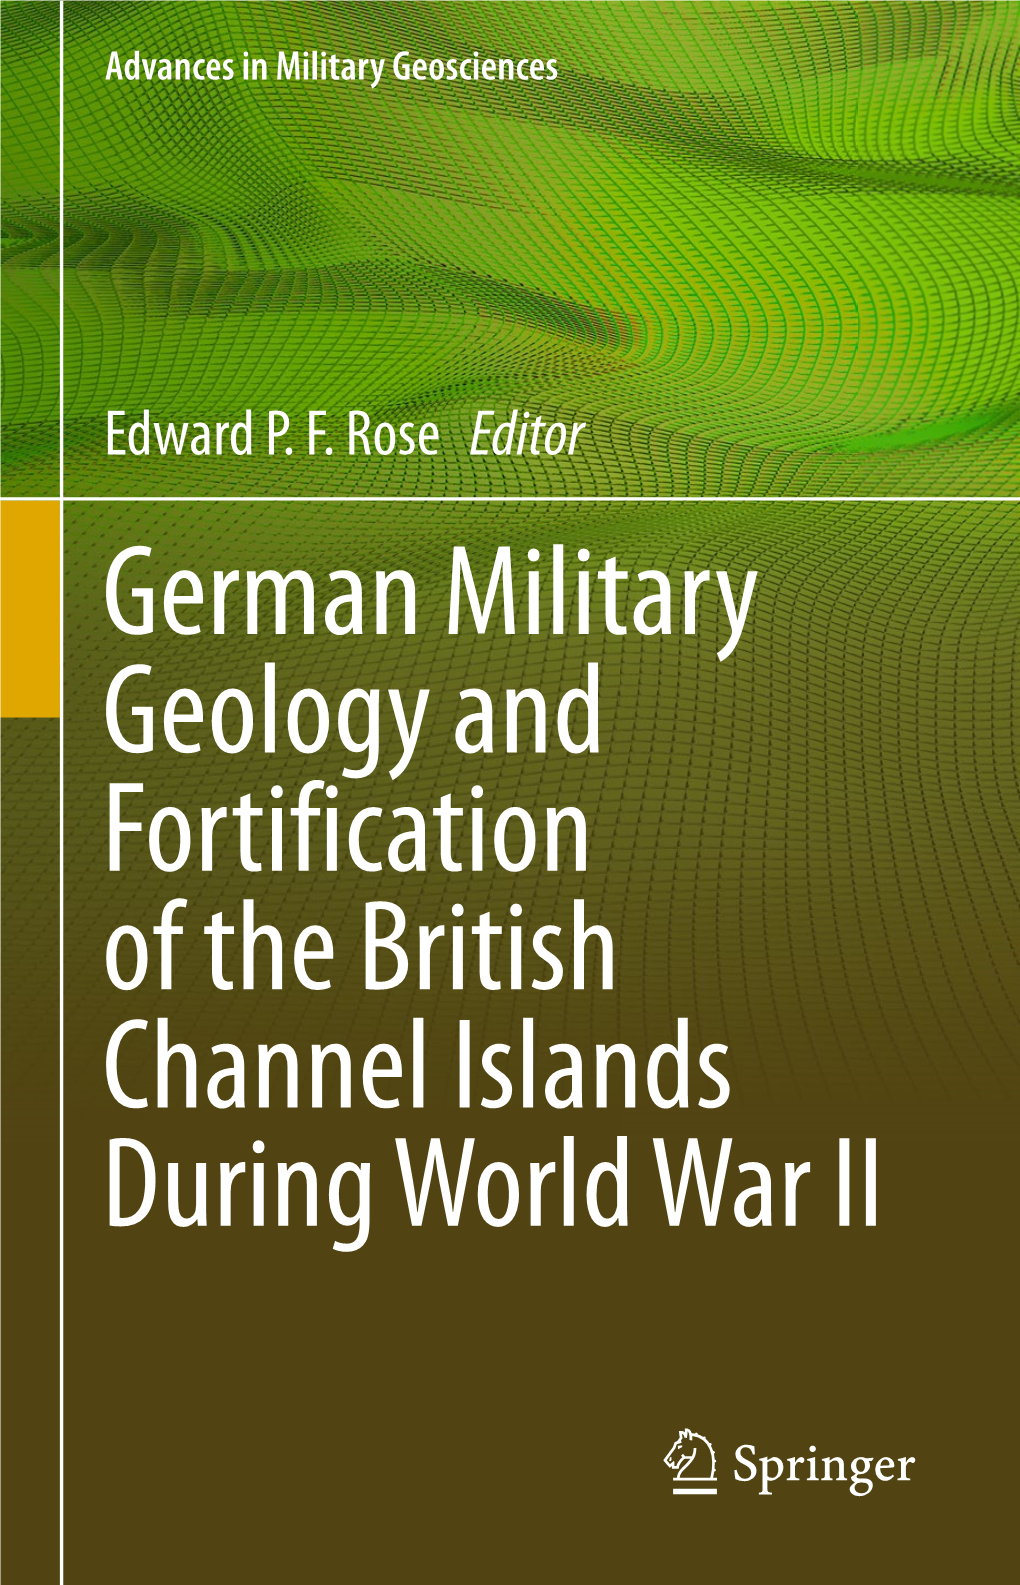 German Military Geology and Fortification of the British Channel Islands During World War II Advances in Military Geosciences